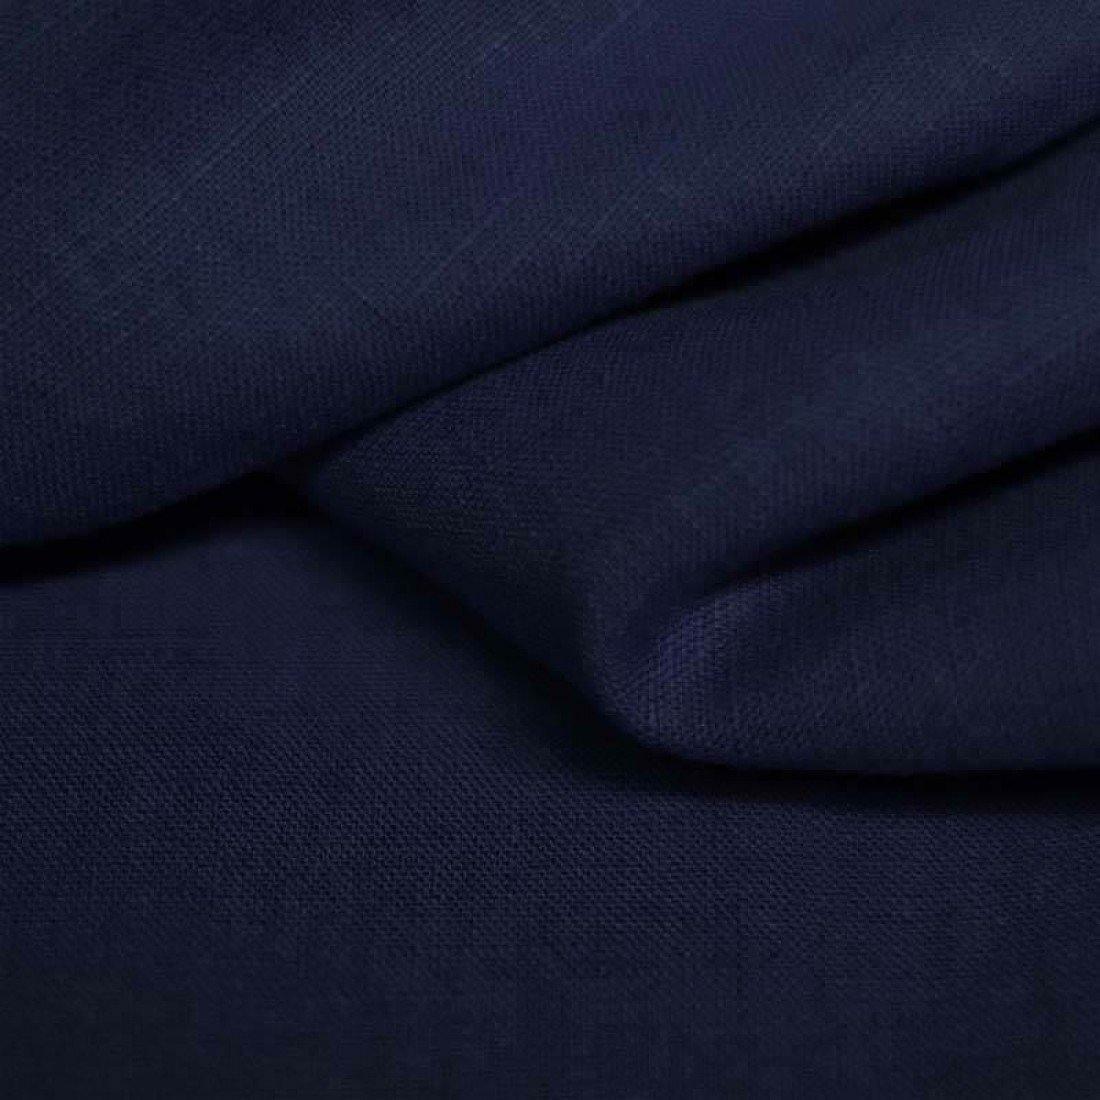 Linen Fabric - Solid in Navy-Linen-Jelly Fabrics